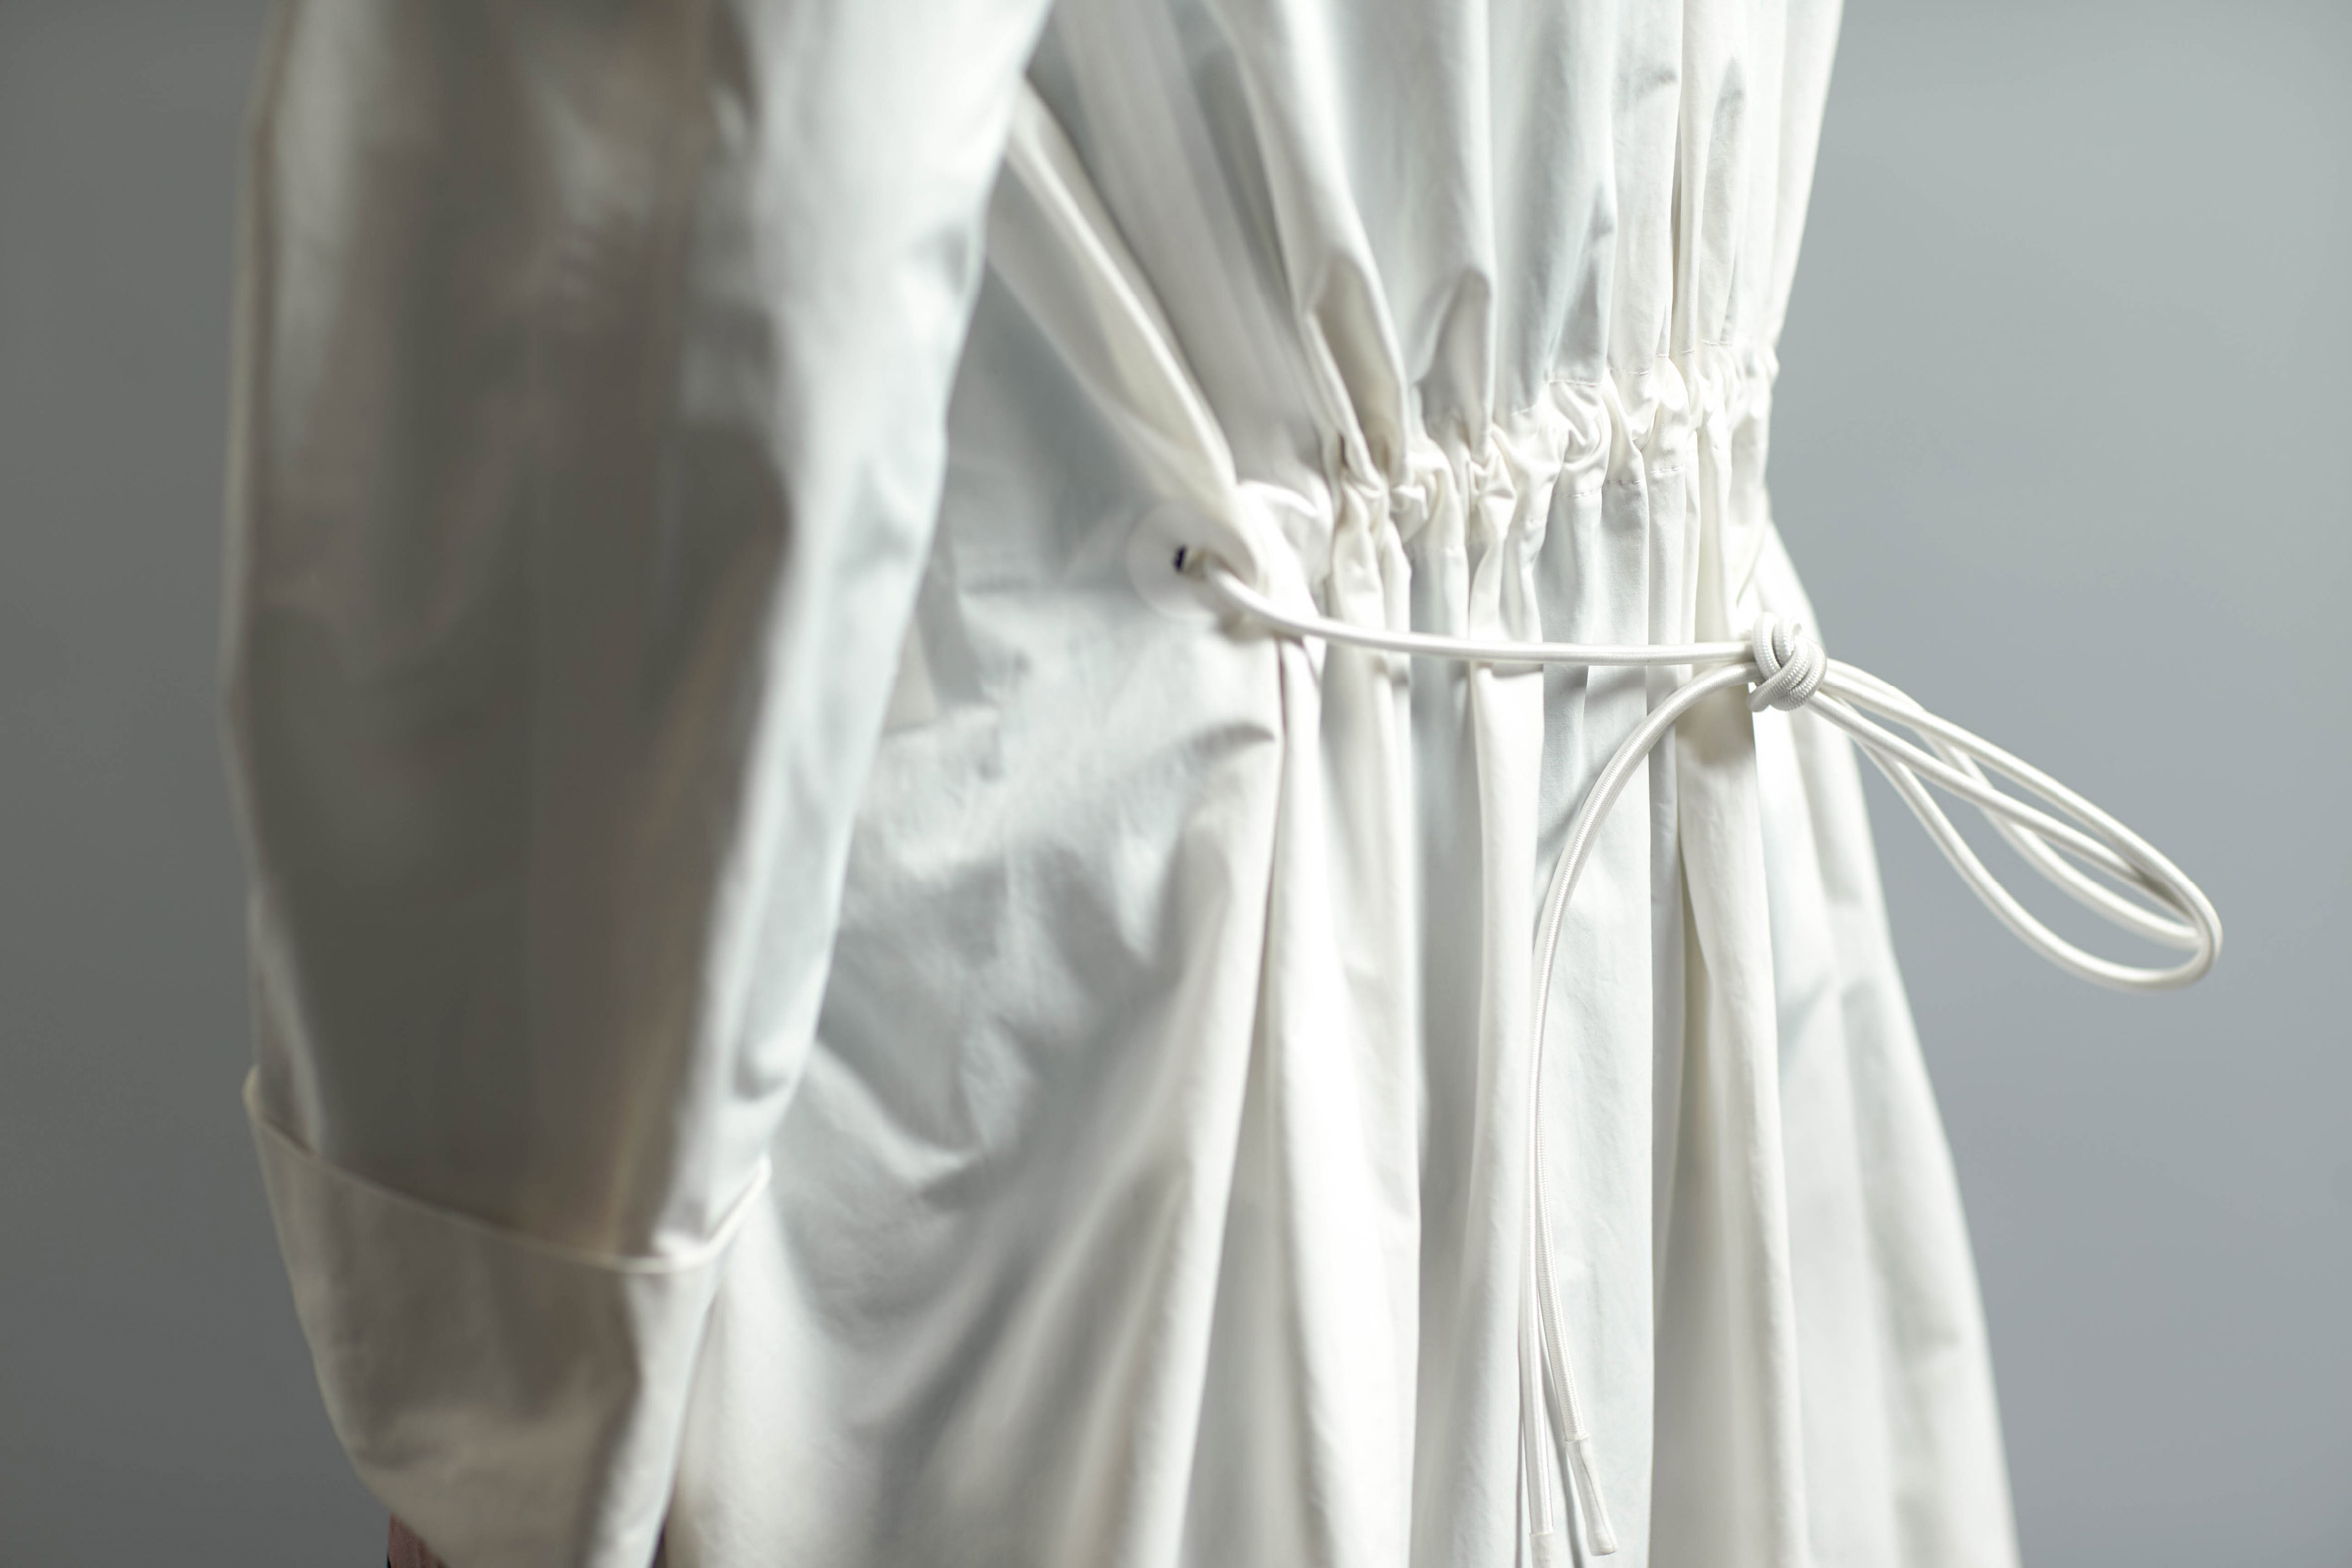 the-new-habit-clothes-inspired-dominican-monks-byborre-design-fashion_dezeen_2364_col_15